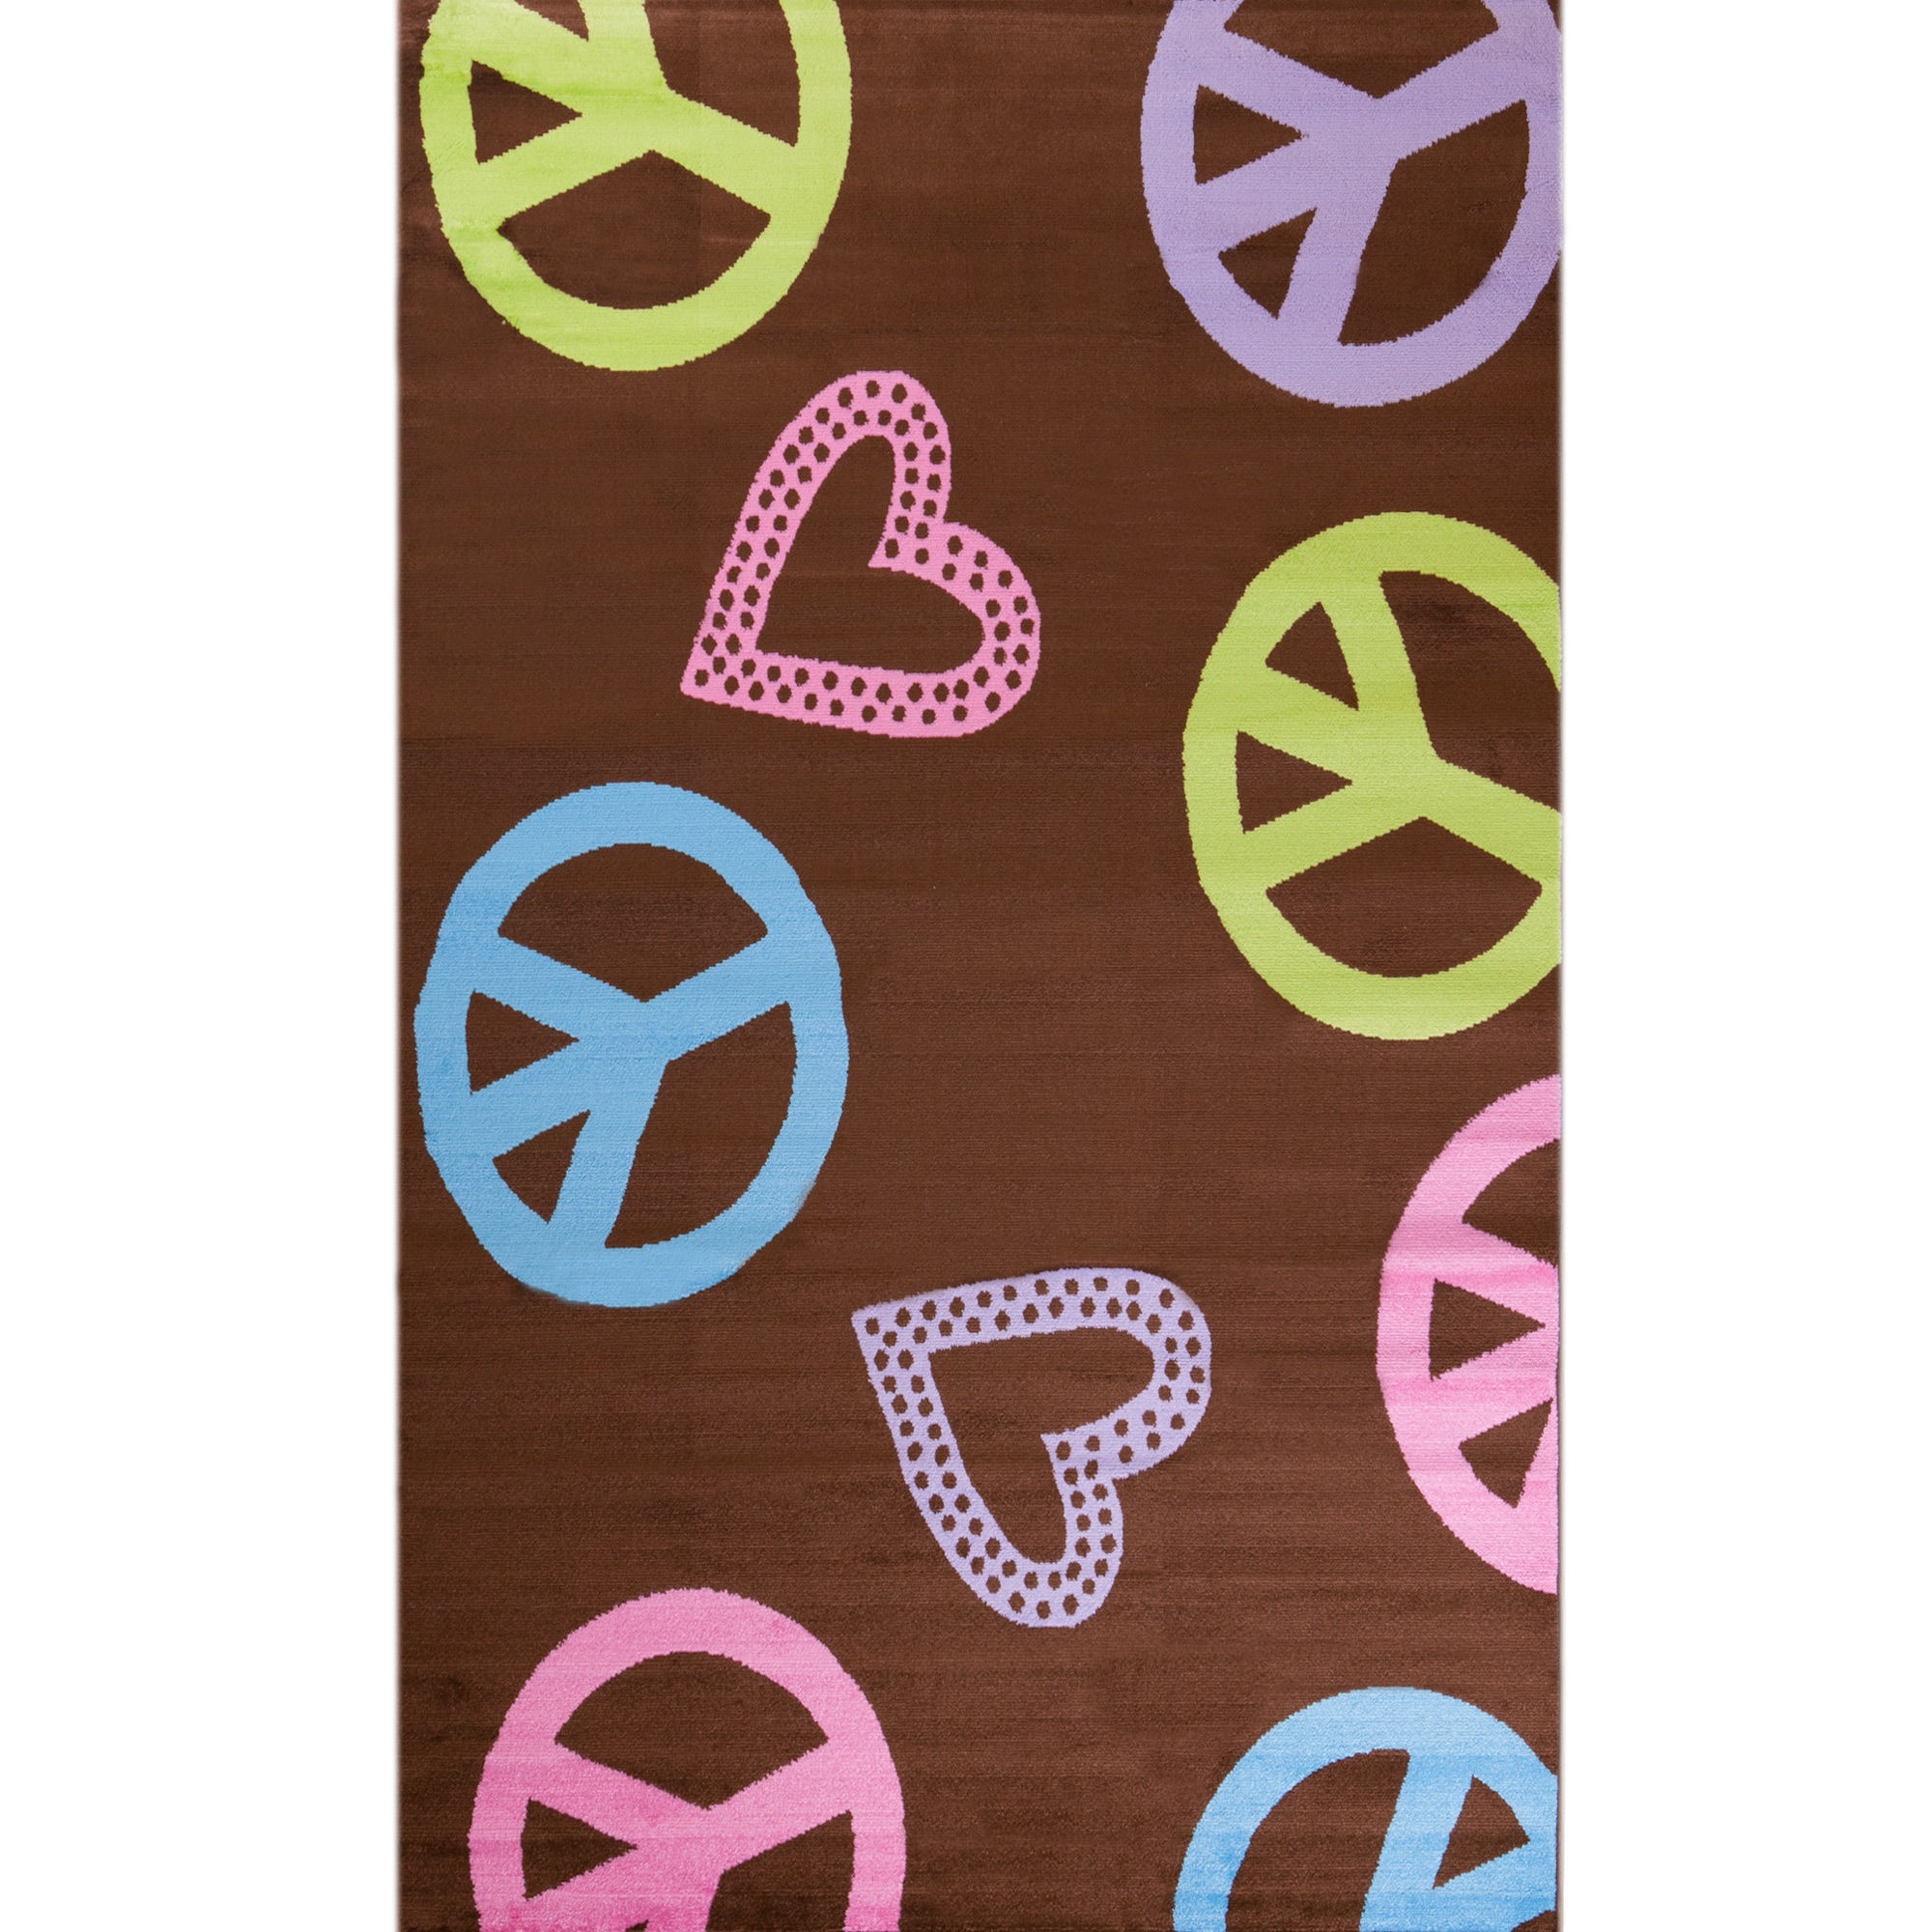 Concord Global  5 x 7 ft. Alisa Peace & Polka Hearts - Brown - image 2 of 3